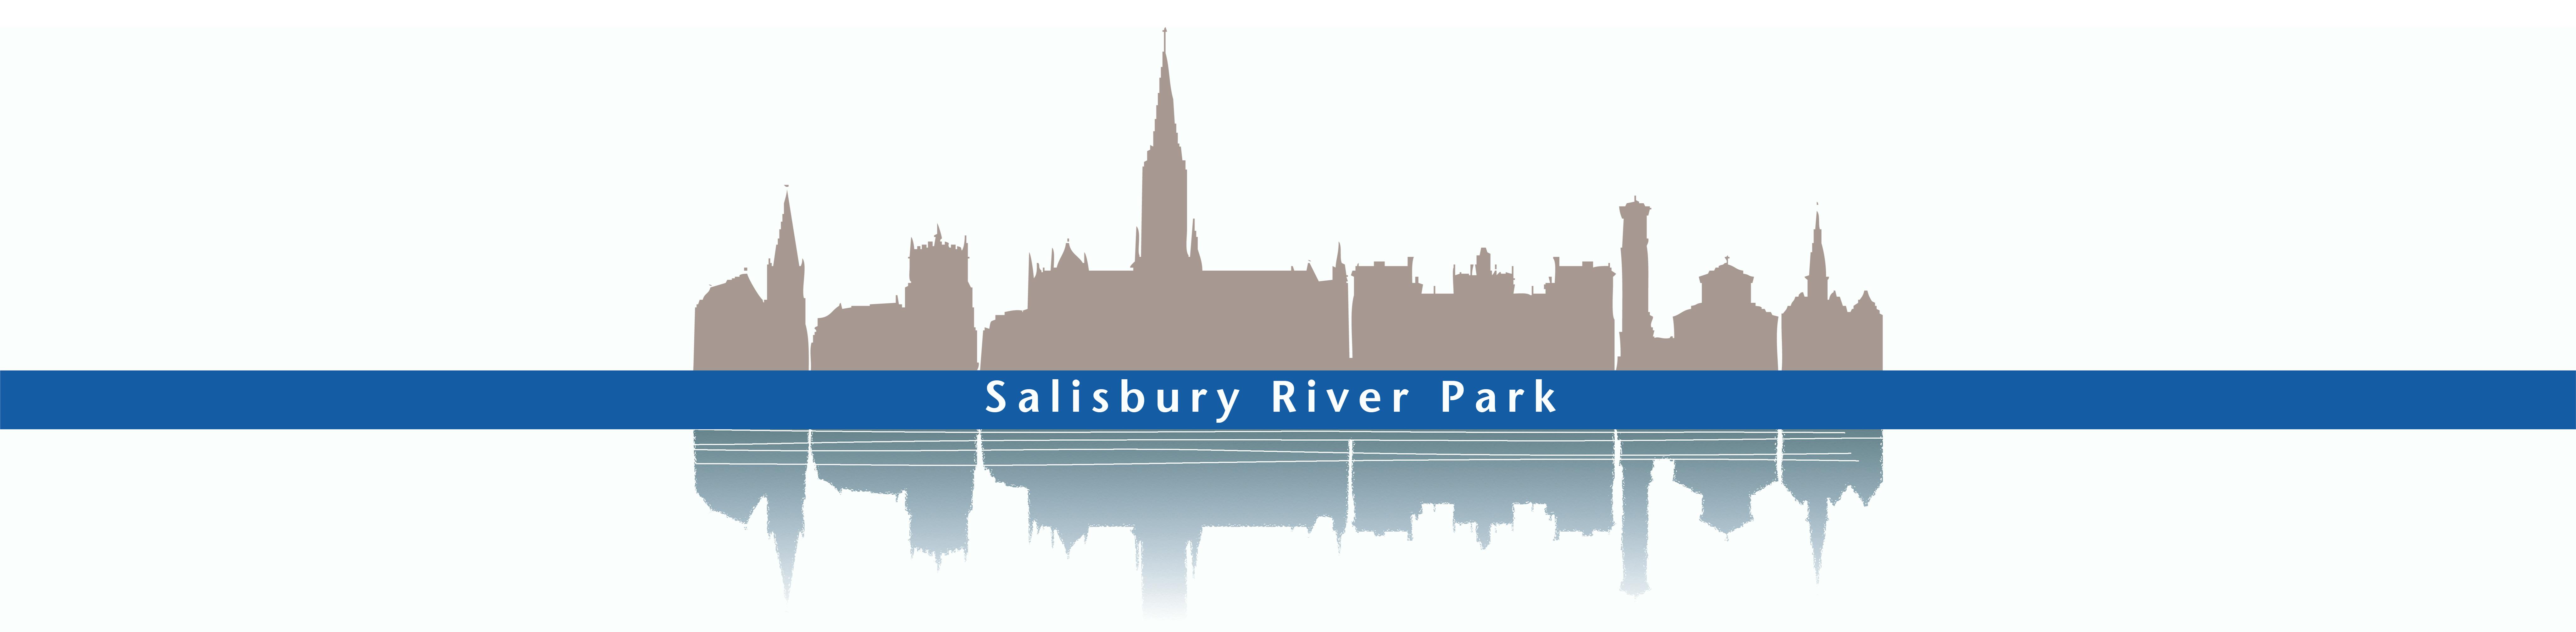 Logo - silhoutte of Salisbury's skyline and reflection on water